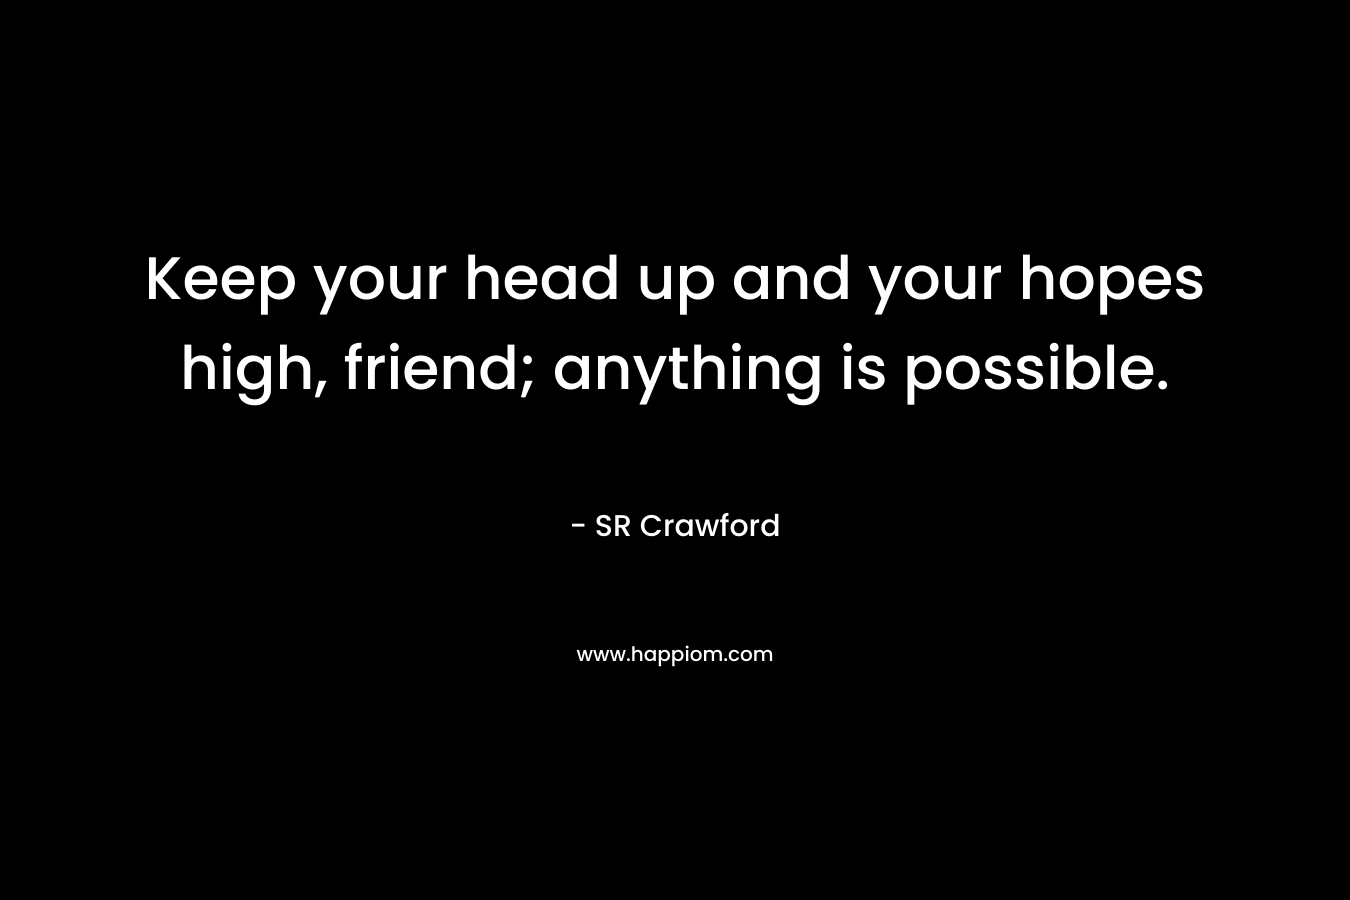 Keep your head up and your hopes high, friend; anything is possible.